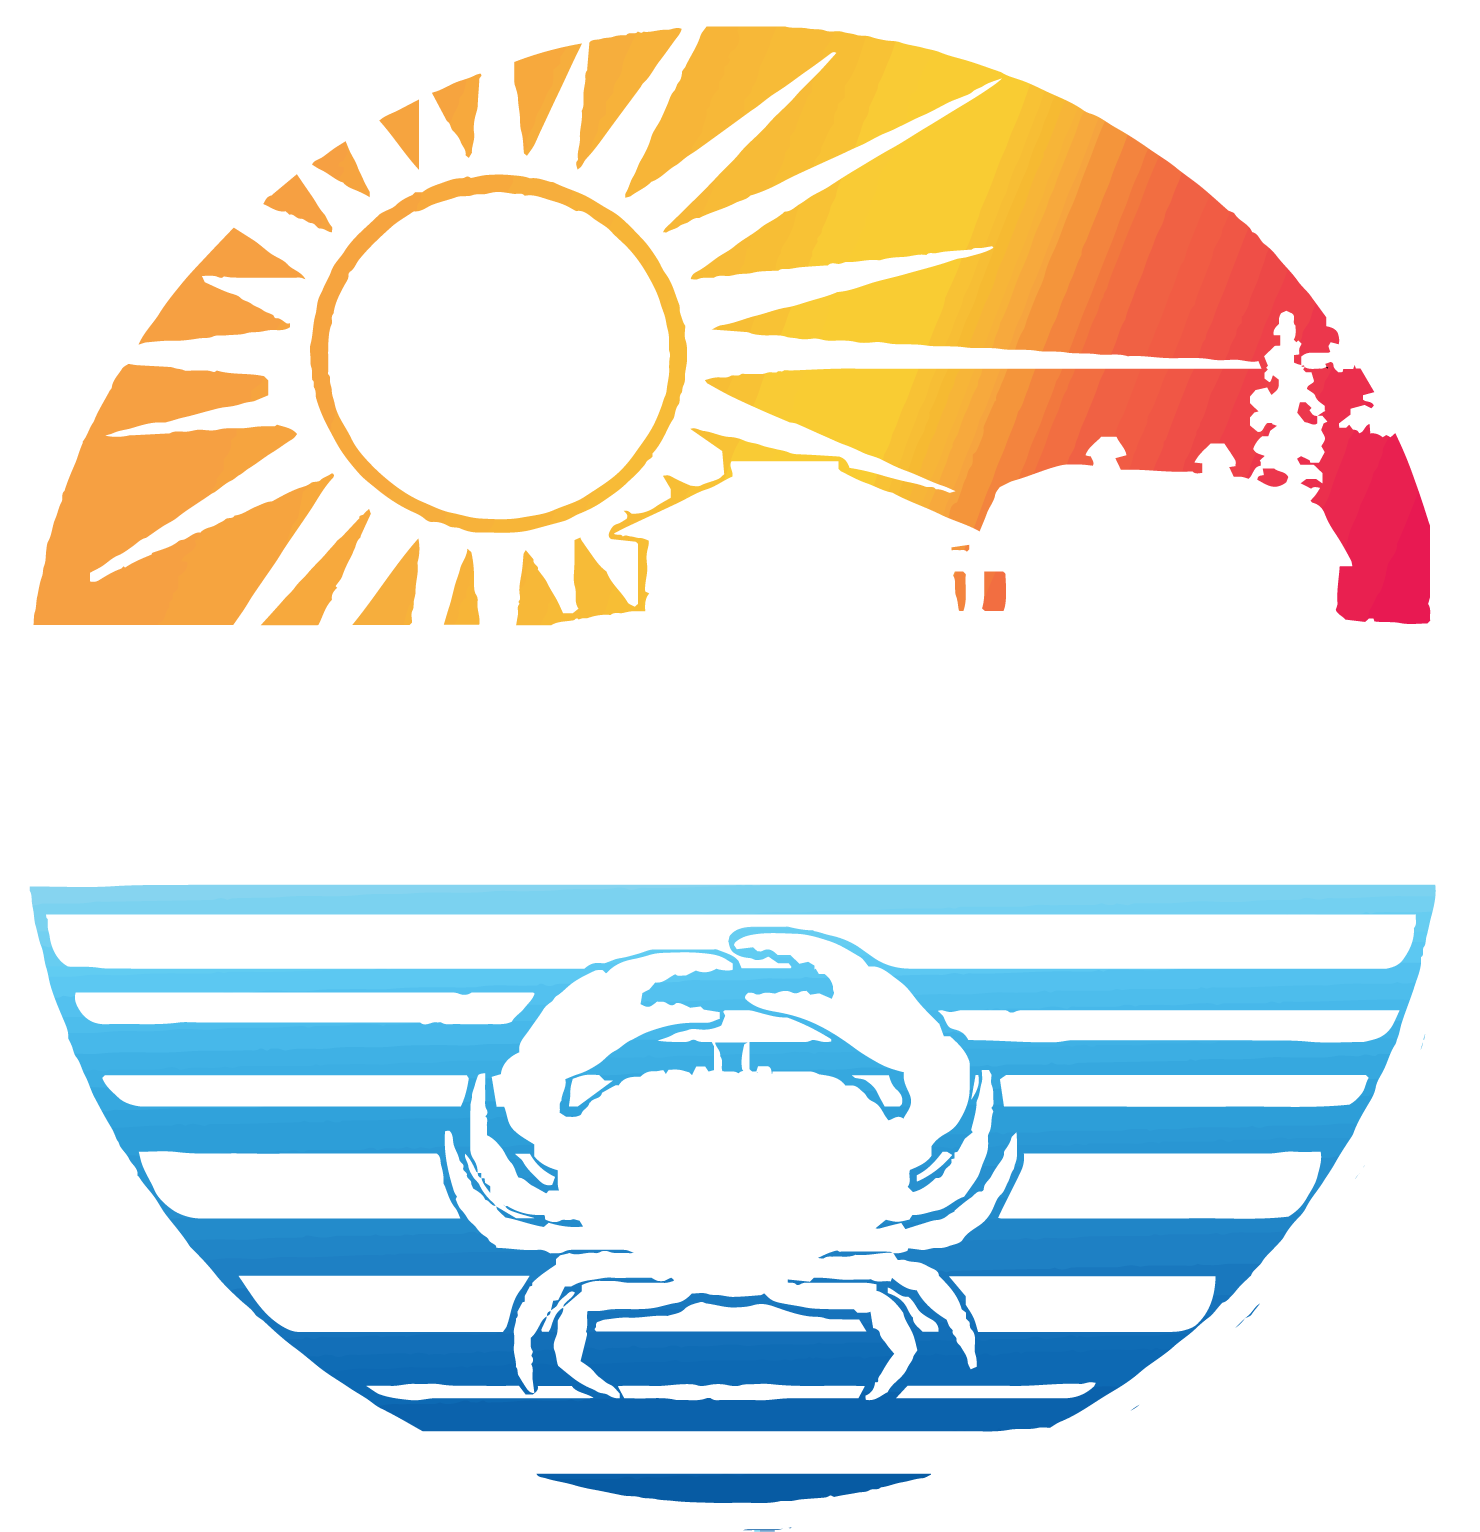 Salty Farms Candle Company